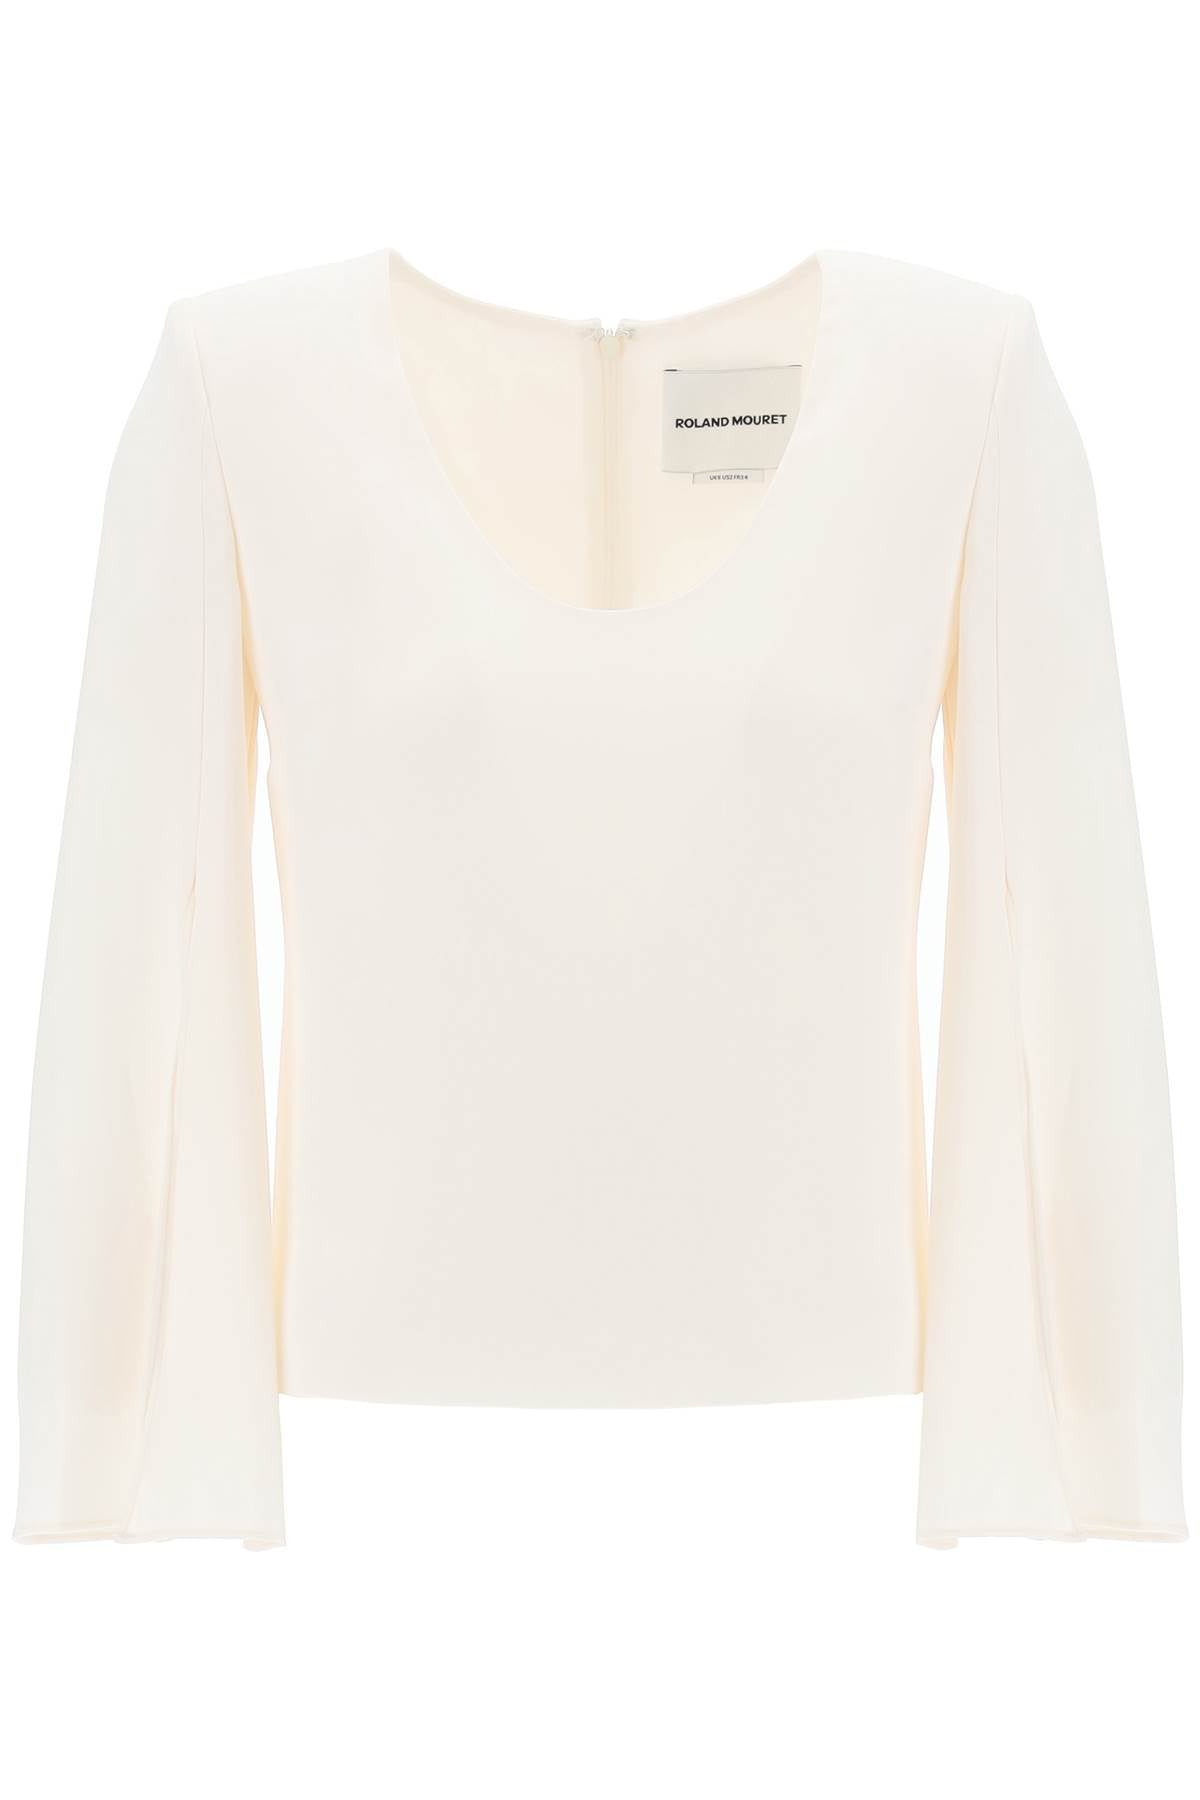 Roland mouret "cady top with flared sleeve"-0